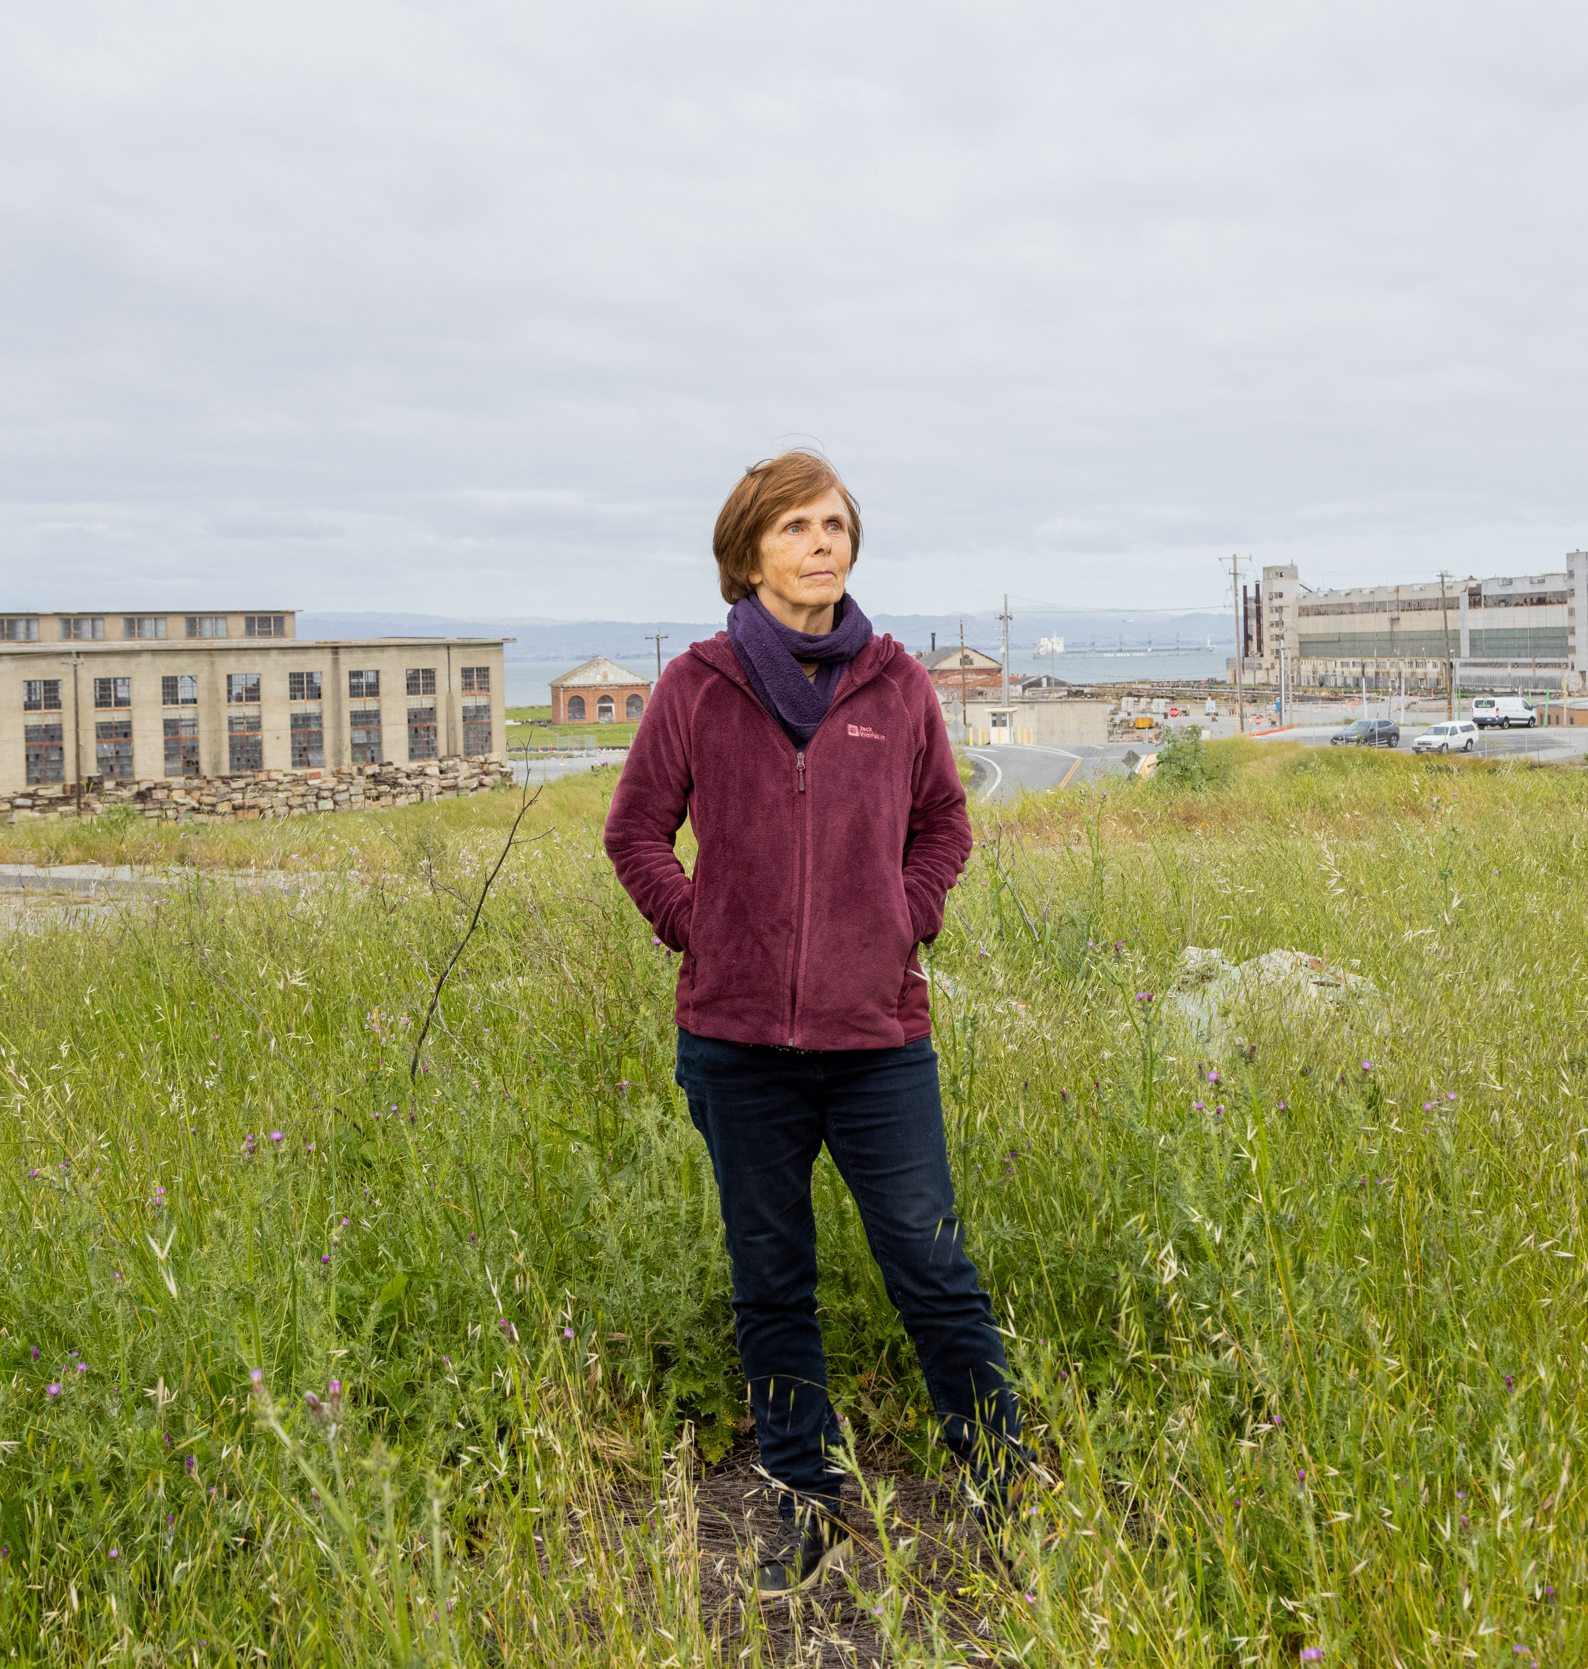 A person stands in a green field with industrial buildings in the background, under an overcast sky.